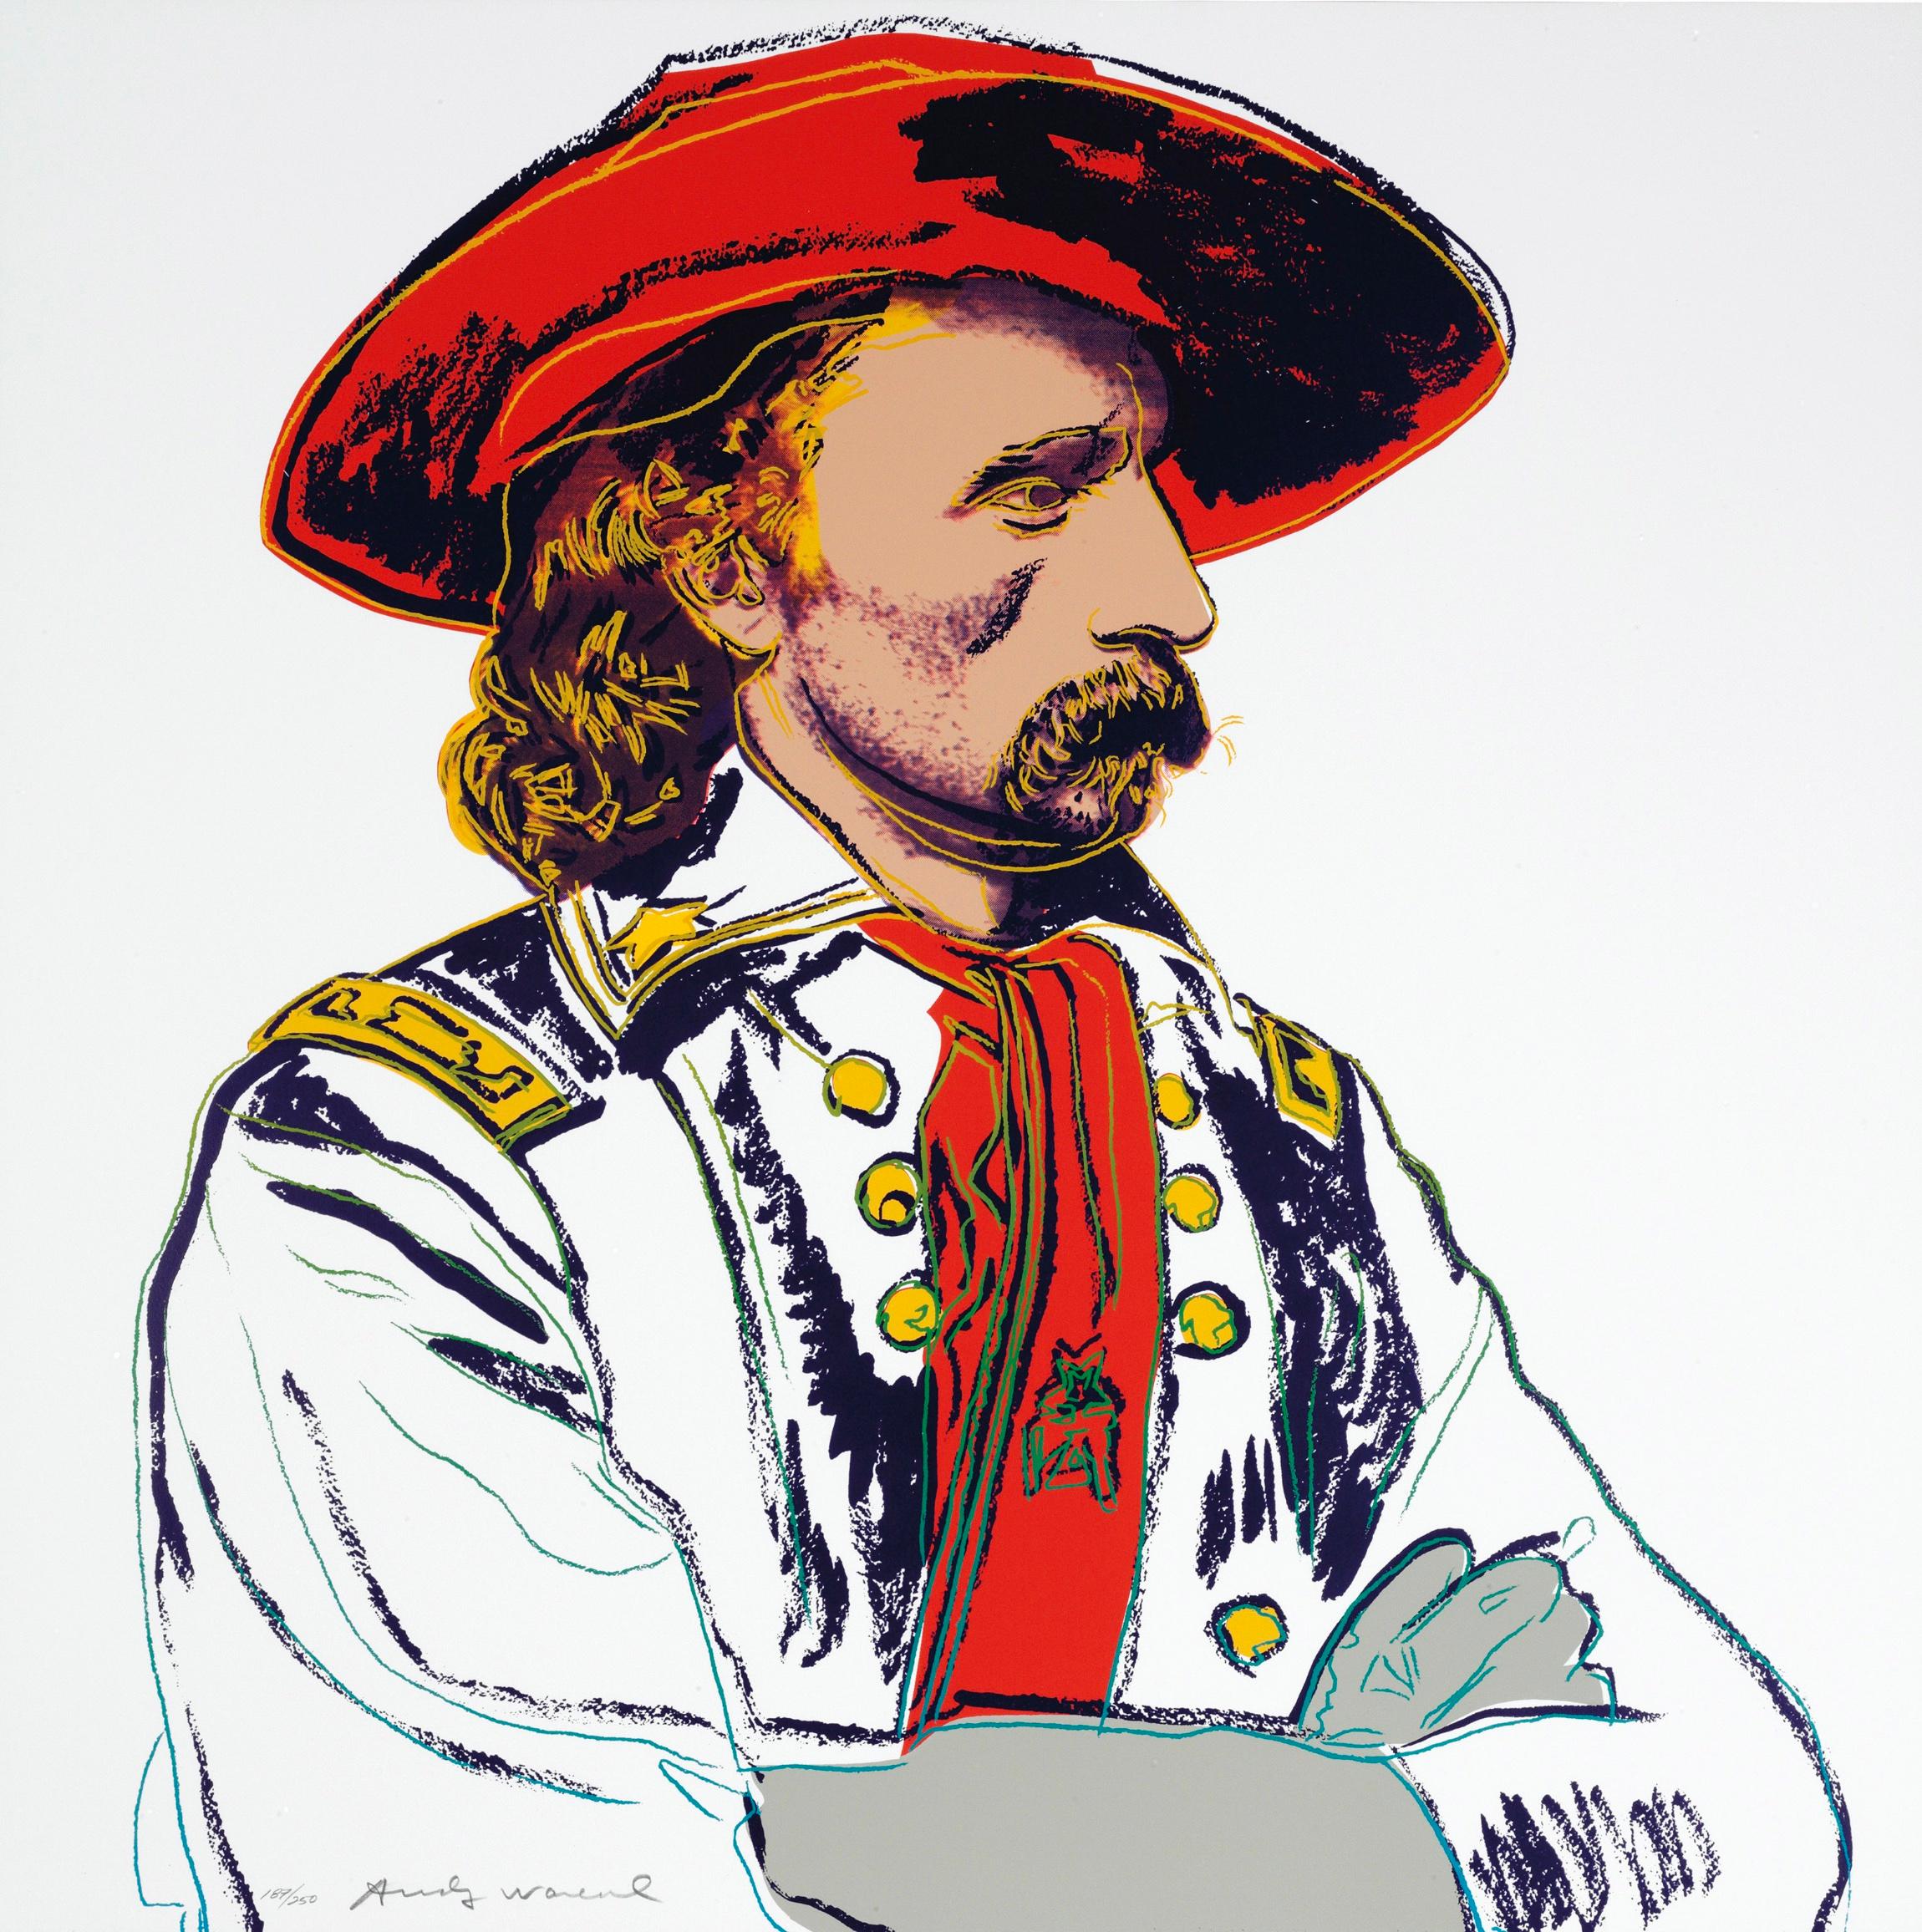 Artist: Andy Warhol
Medium: Original screenprint on Lenox Museum Board
Title: General Custer
Portfolio: Cowboys and Indians
Year: 1986
Edition: AP 5/50
Signed: Hand signed in pencil
Reference: Feldman II.379
Sheet Size: 36" x 36"
Frame Size: 36 3/4"